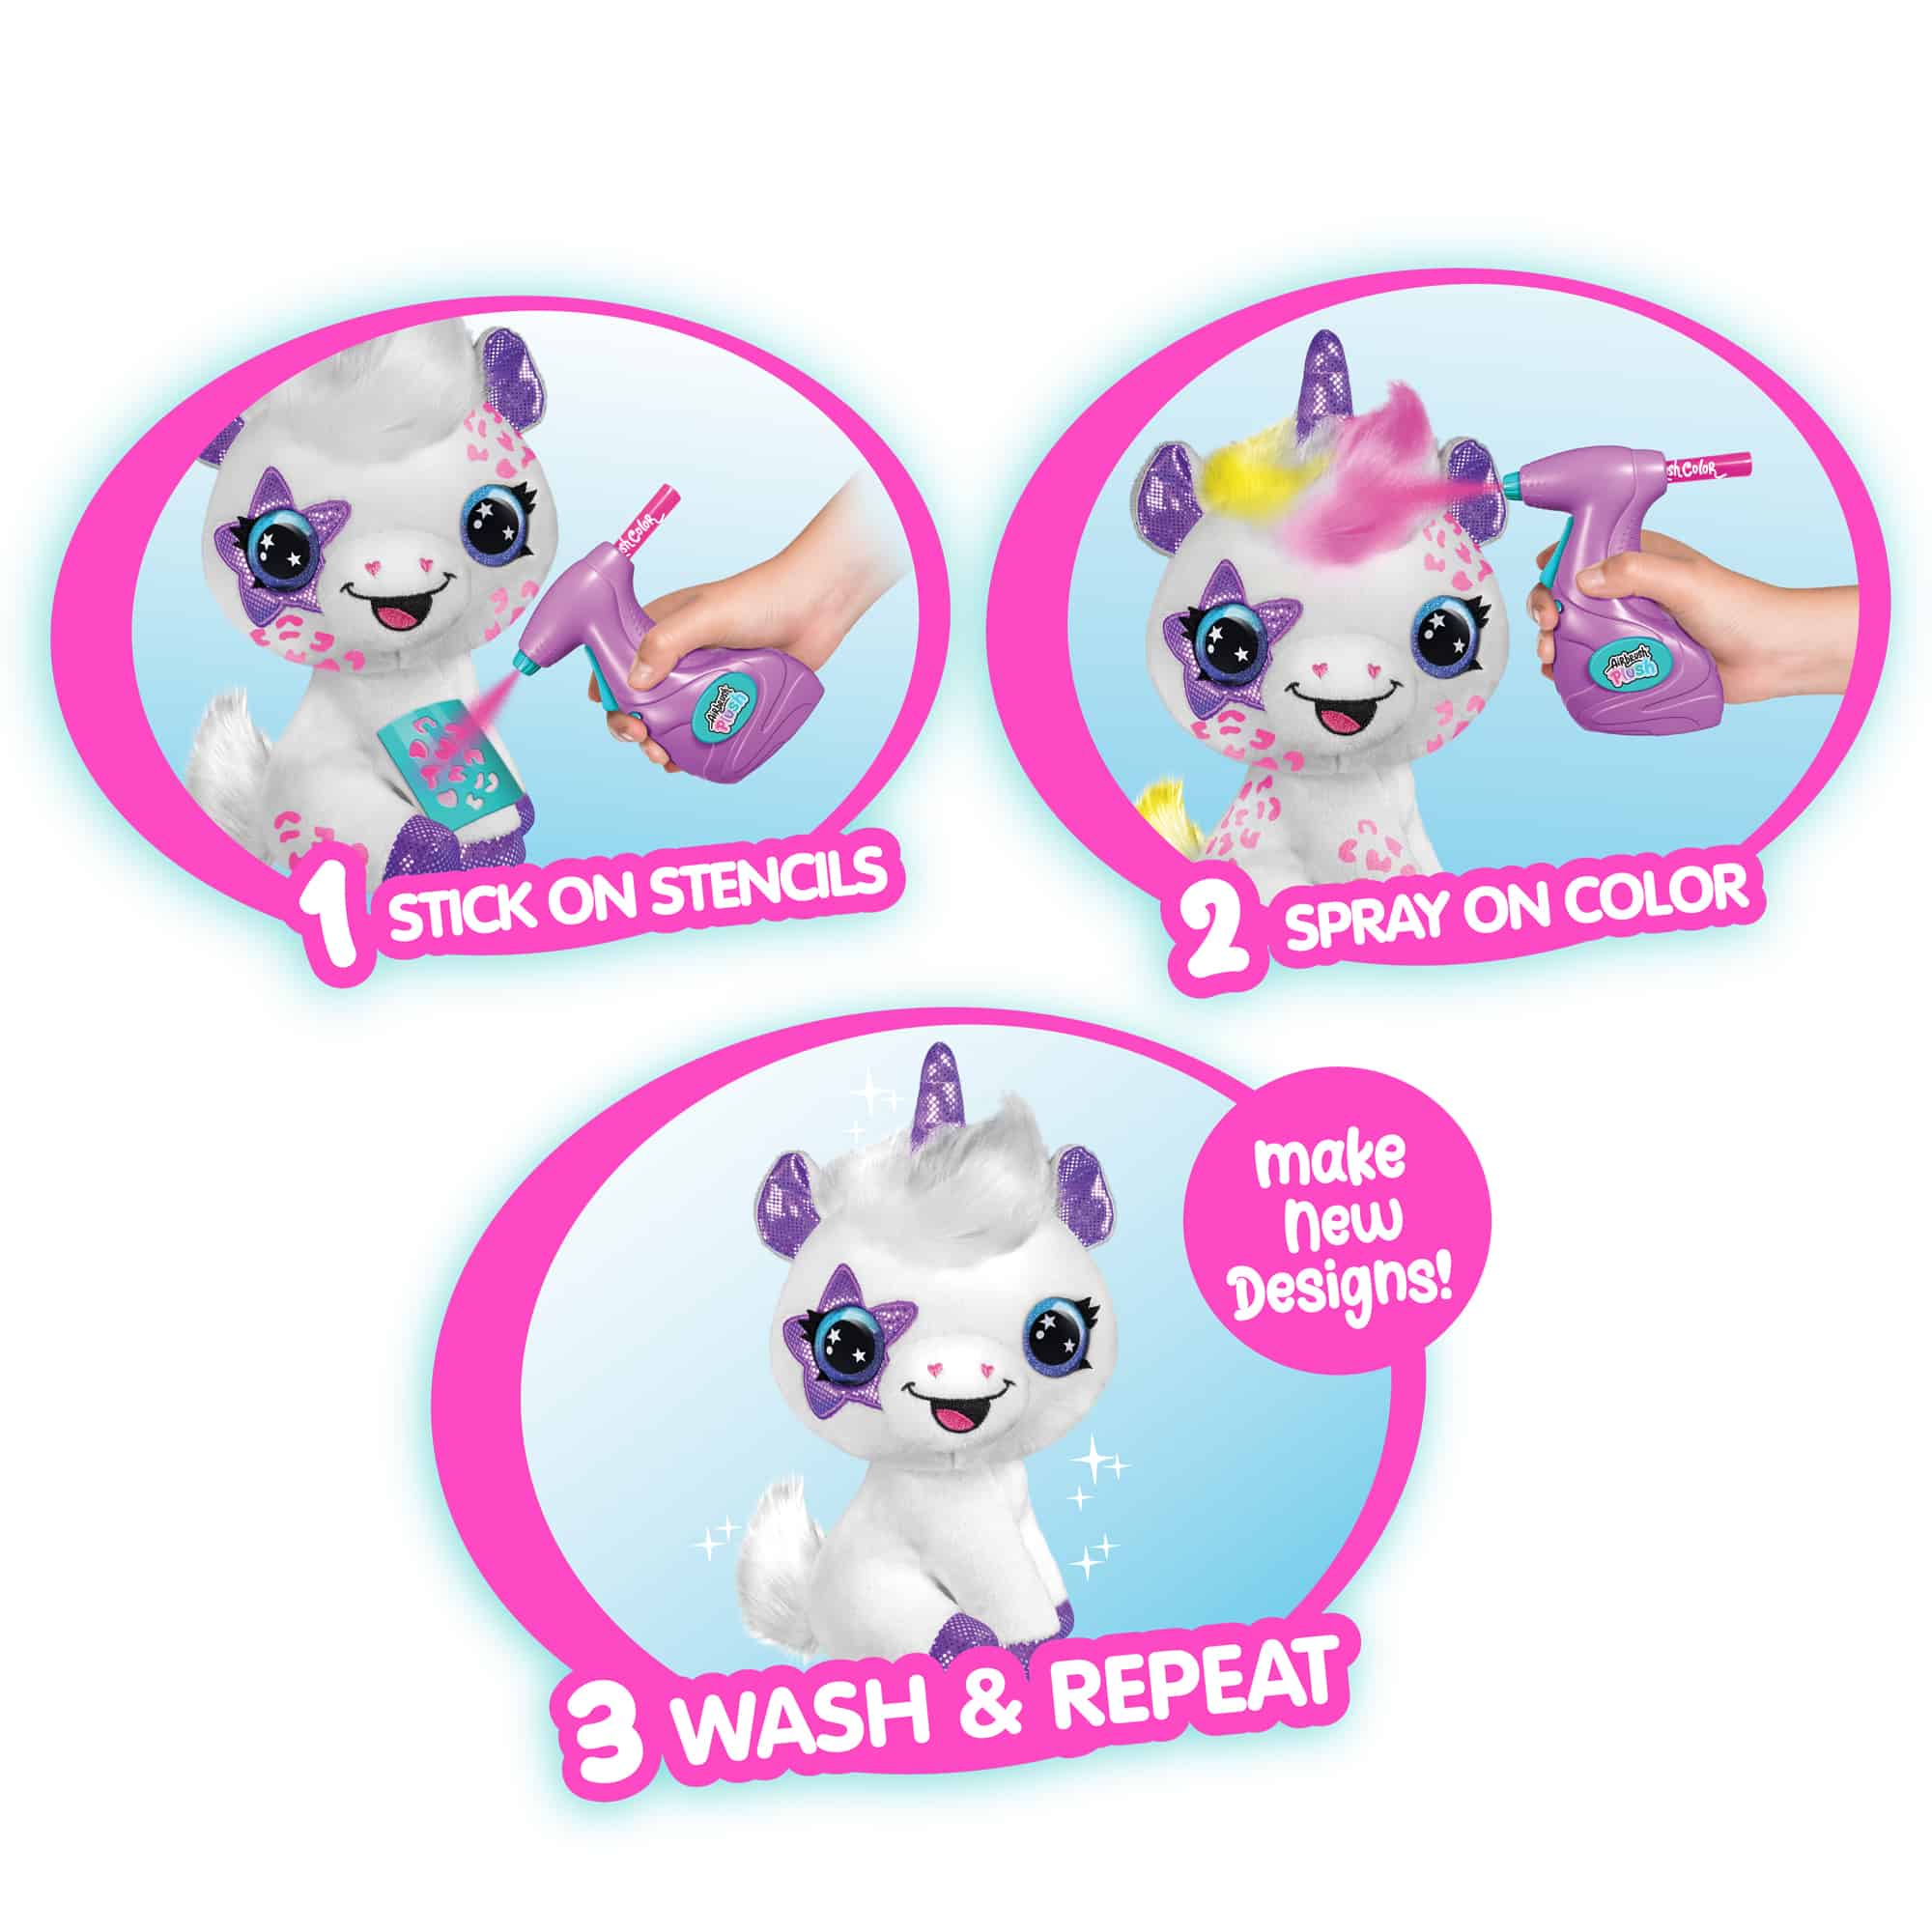  Canal Toys Personalize Airbrush Plush Large Purple Unicorn!  Decorate, wash, Repeat! Customize Your own Spray Art Plush with Markers,  Battery Powered Airbrush and 100+ Stencils. Ages 6+ : Everything Else